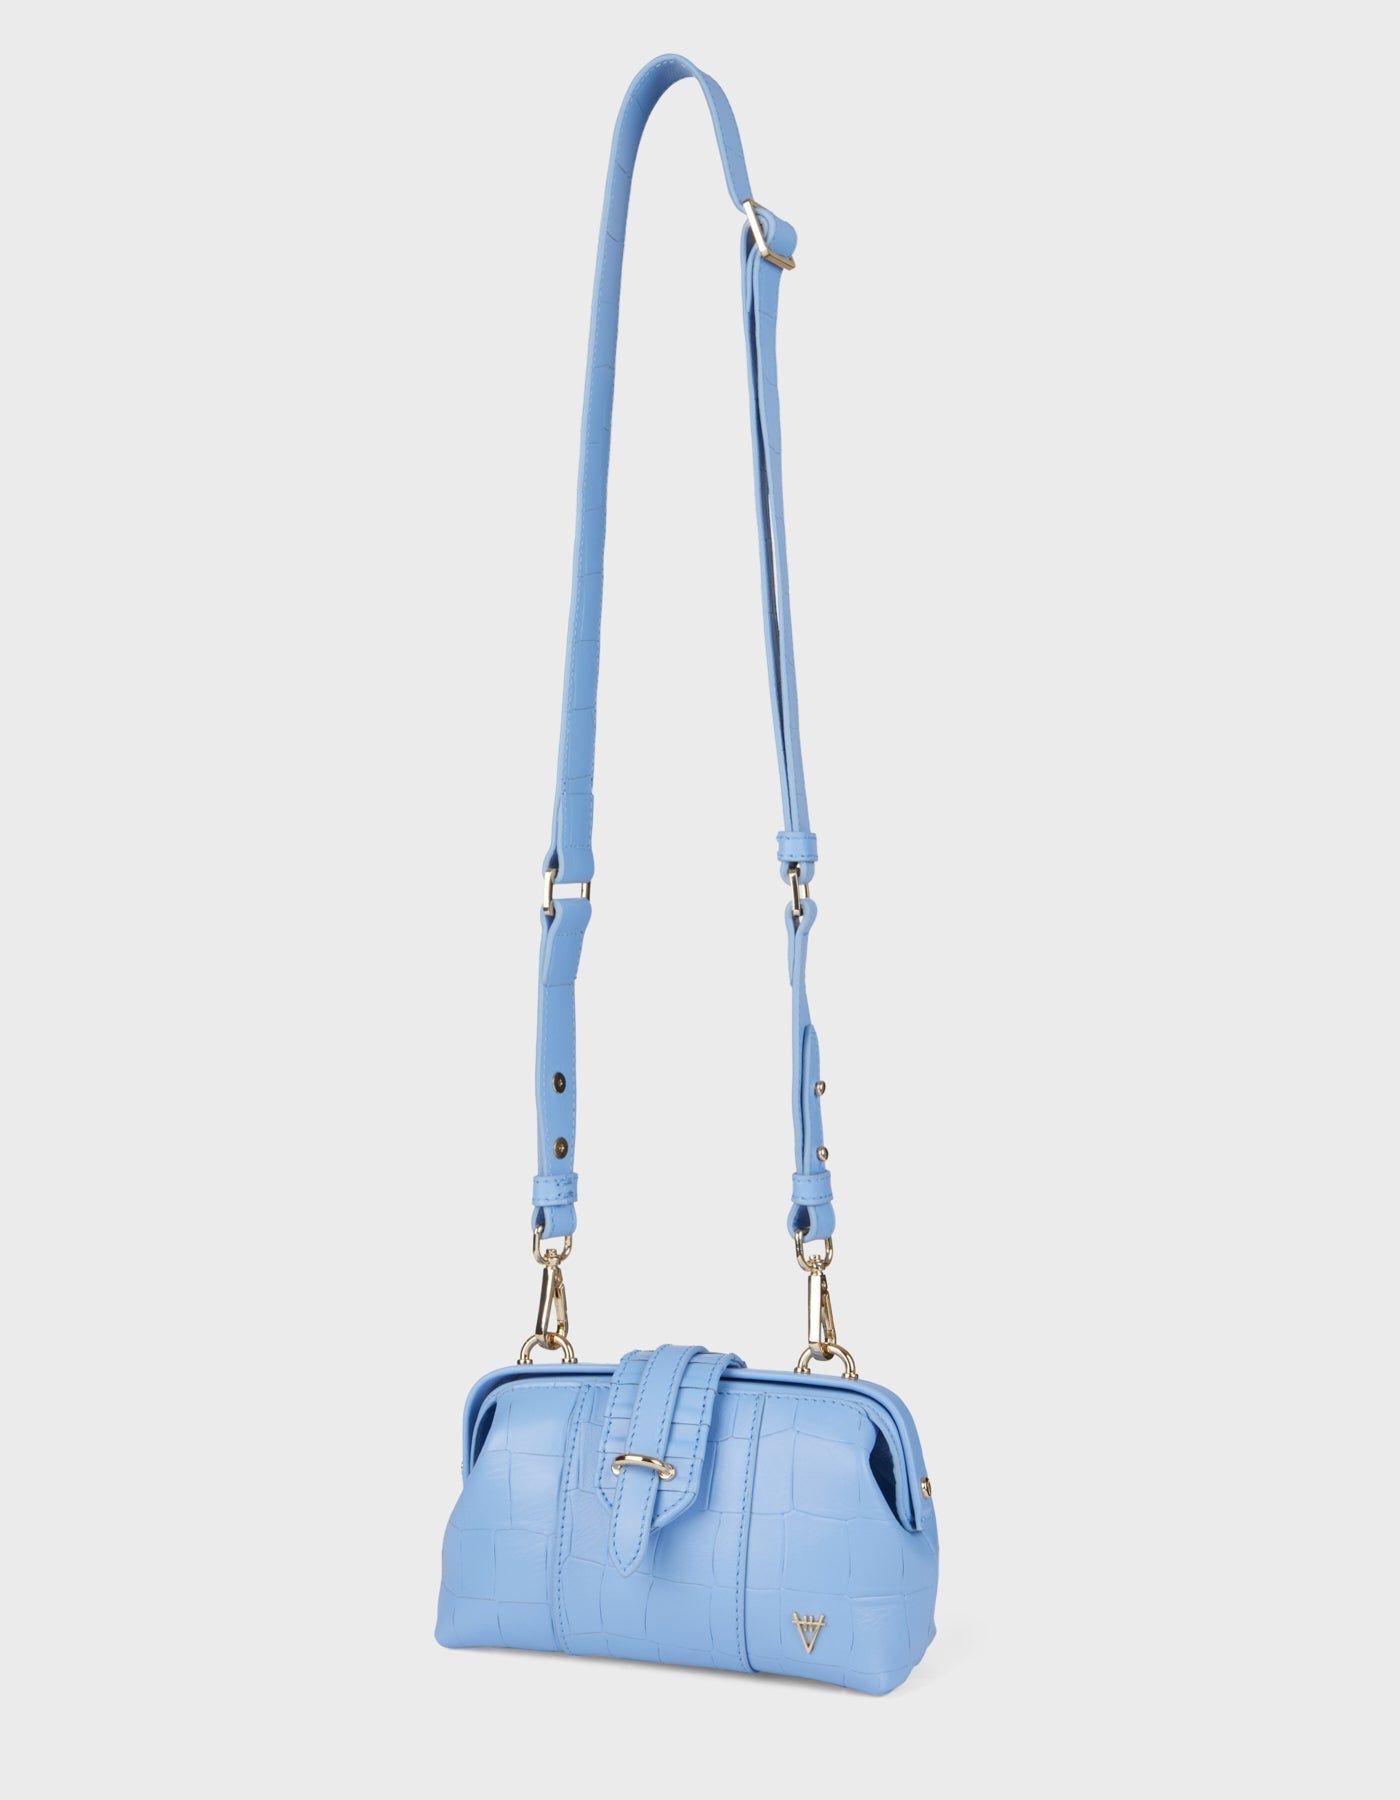 HiVa Atelier | Mini Nubes Doctor Bag Tranquil Blue | Beautiful and Versatile Leather Accessories